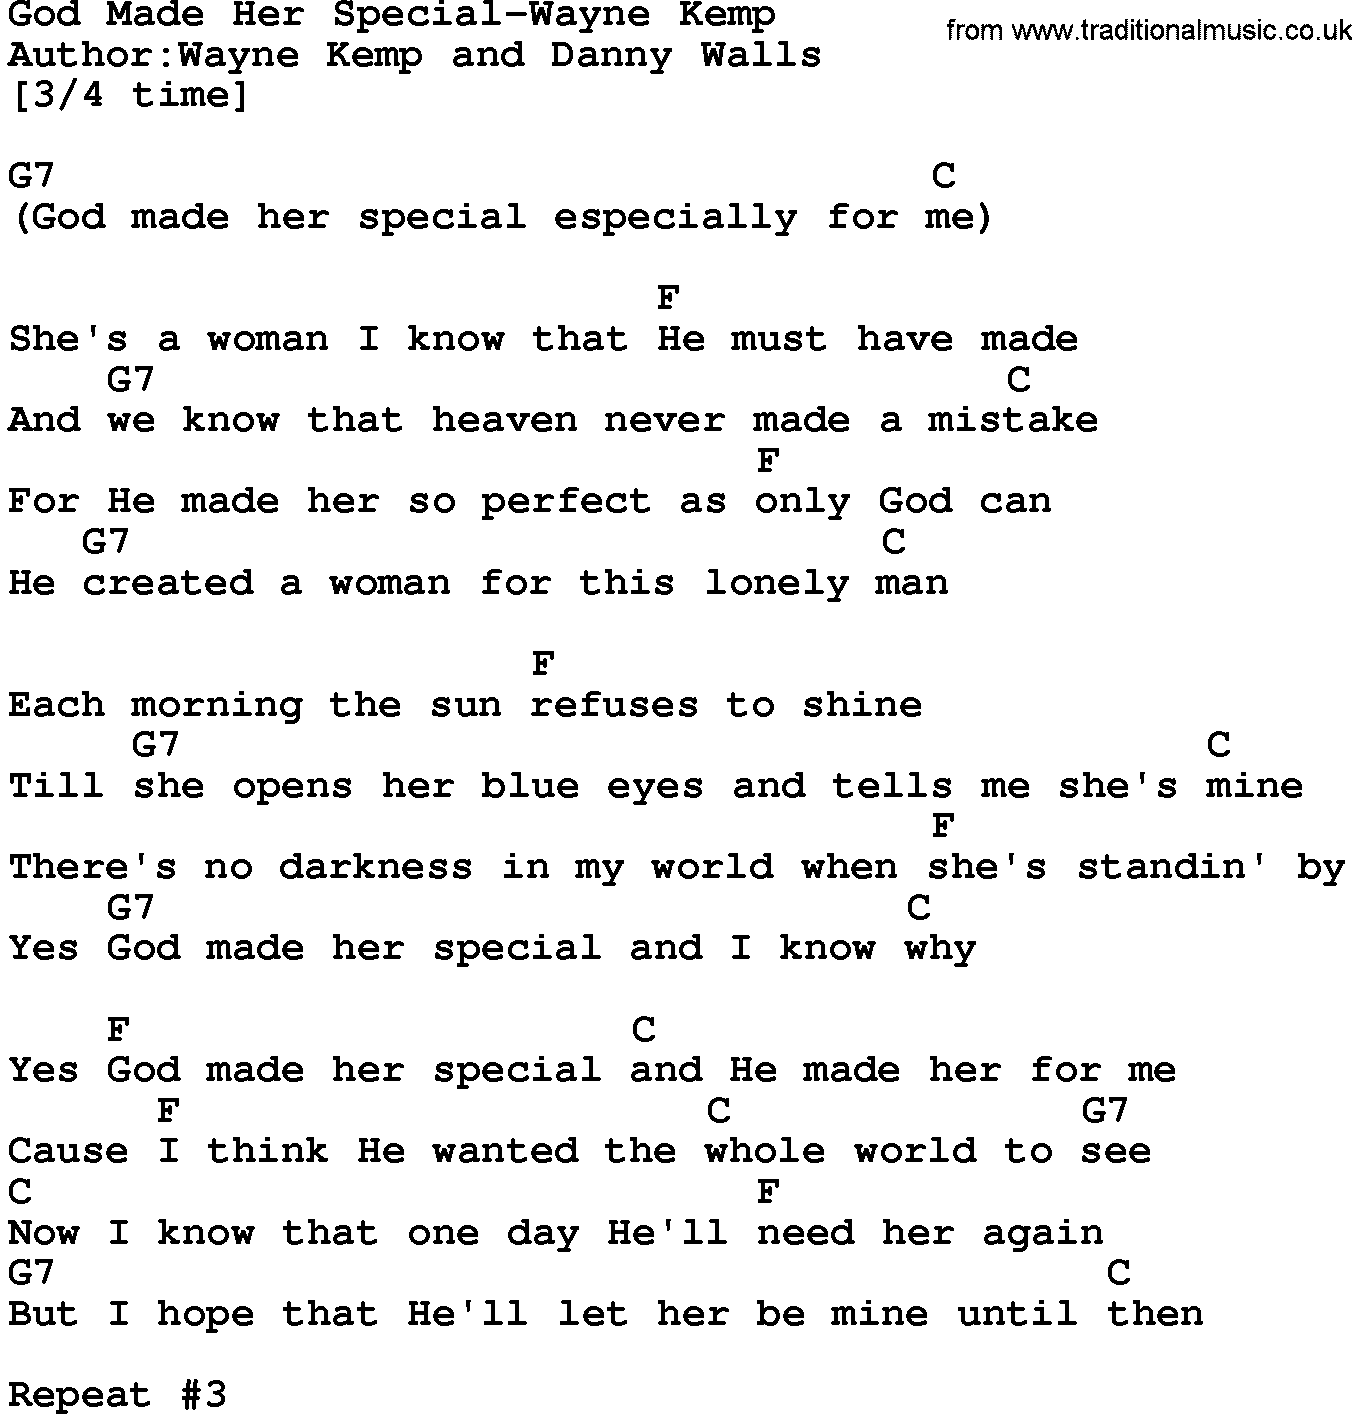 Country music song: God Made Her Special-Wayne Kemp lyrics and chords